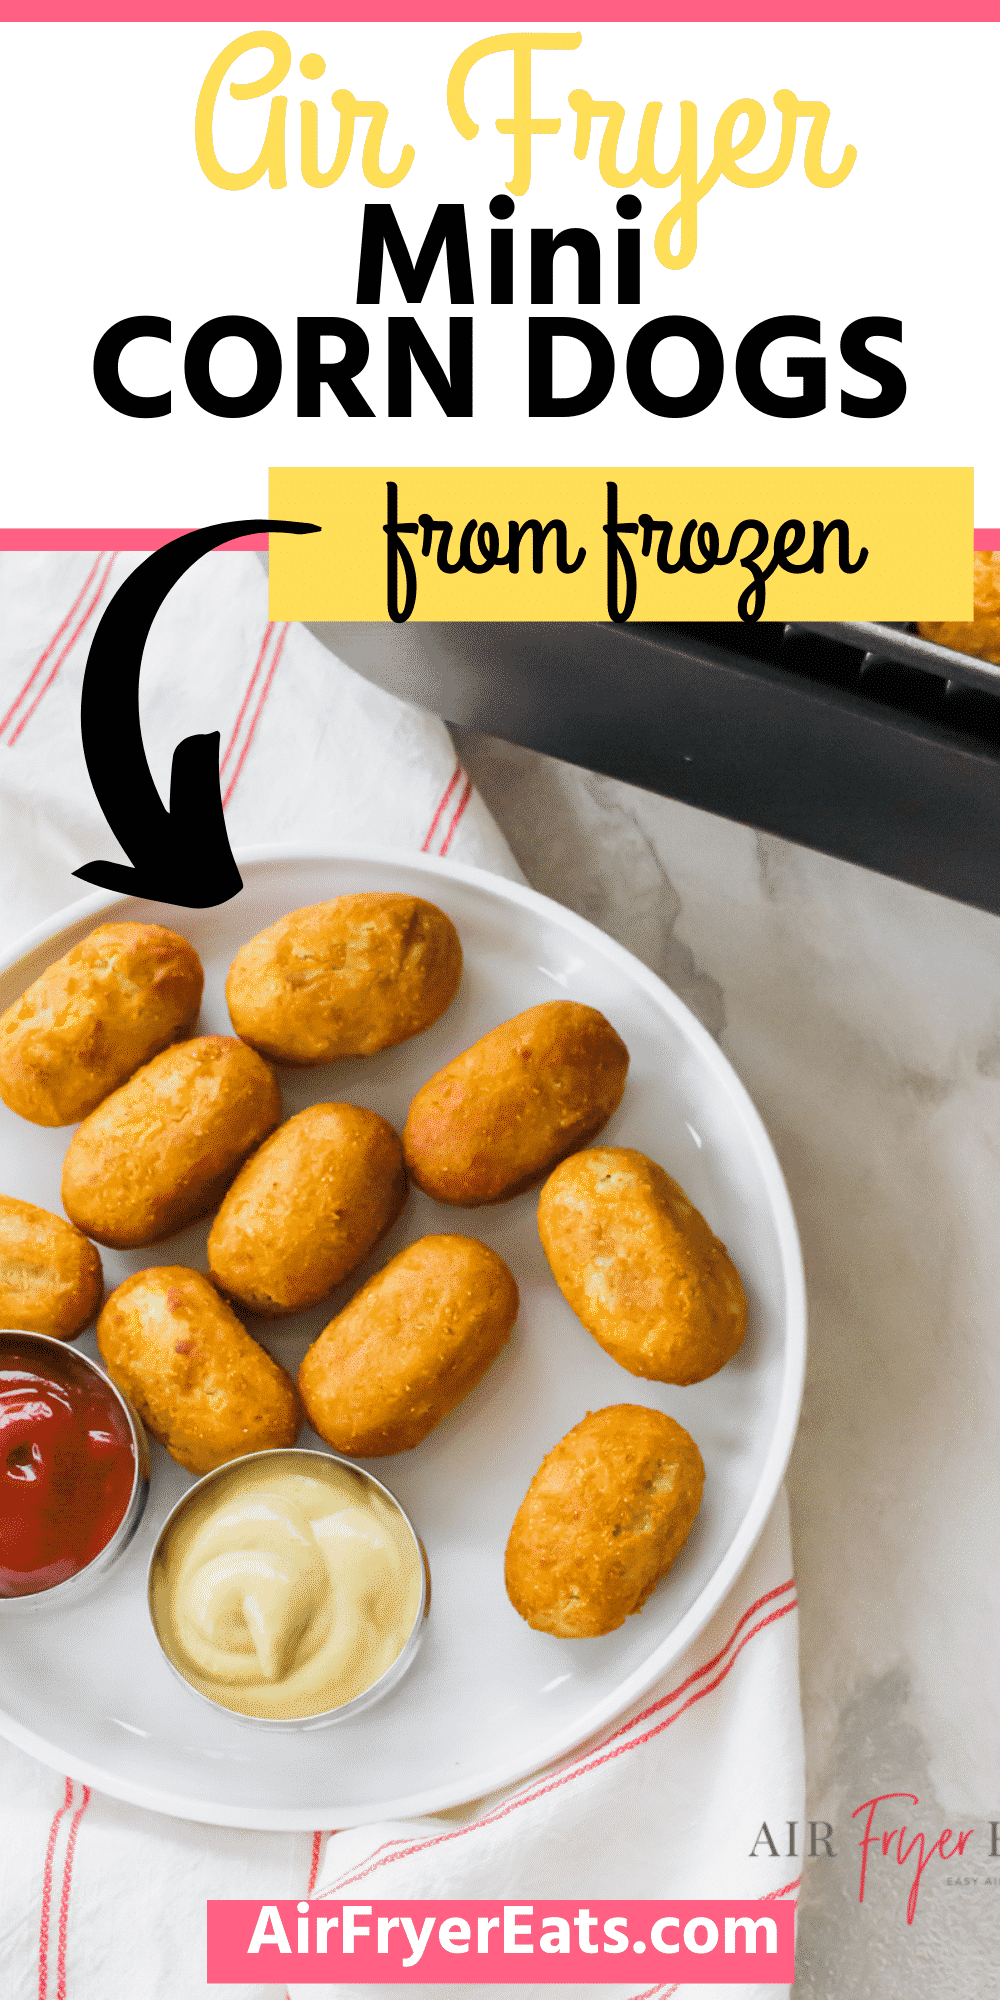 Air Fryer mini corn dogs are quick and easy appetizer to make. Serve these at a party or use them for a kid friendly dinner or lunch option. #air fryer #snacks #fairfood via @vegetarianmamma